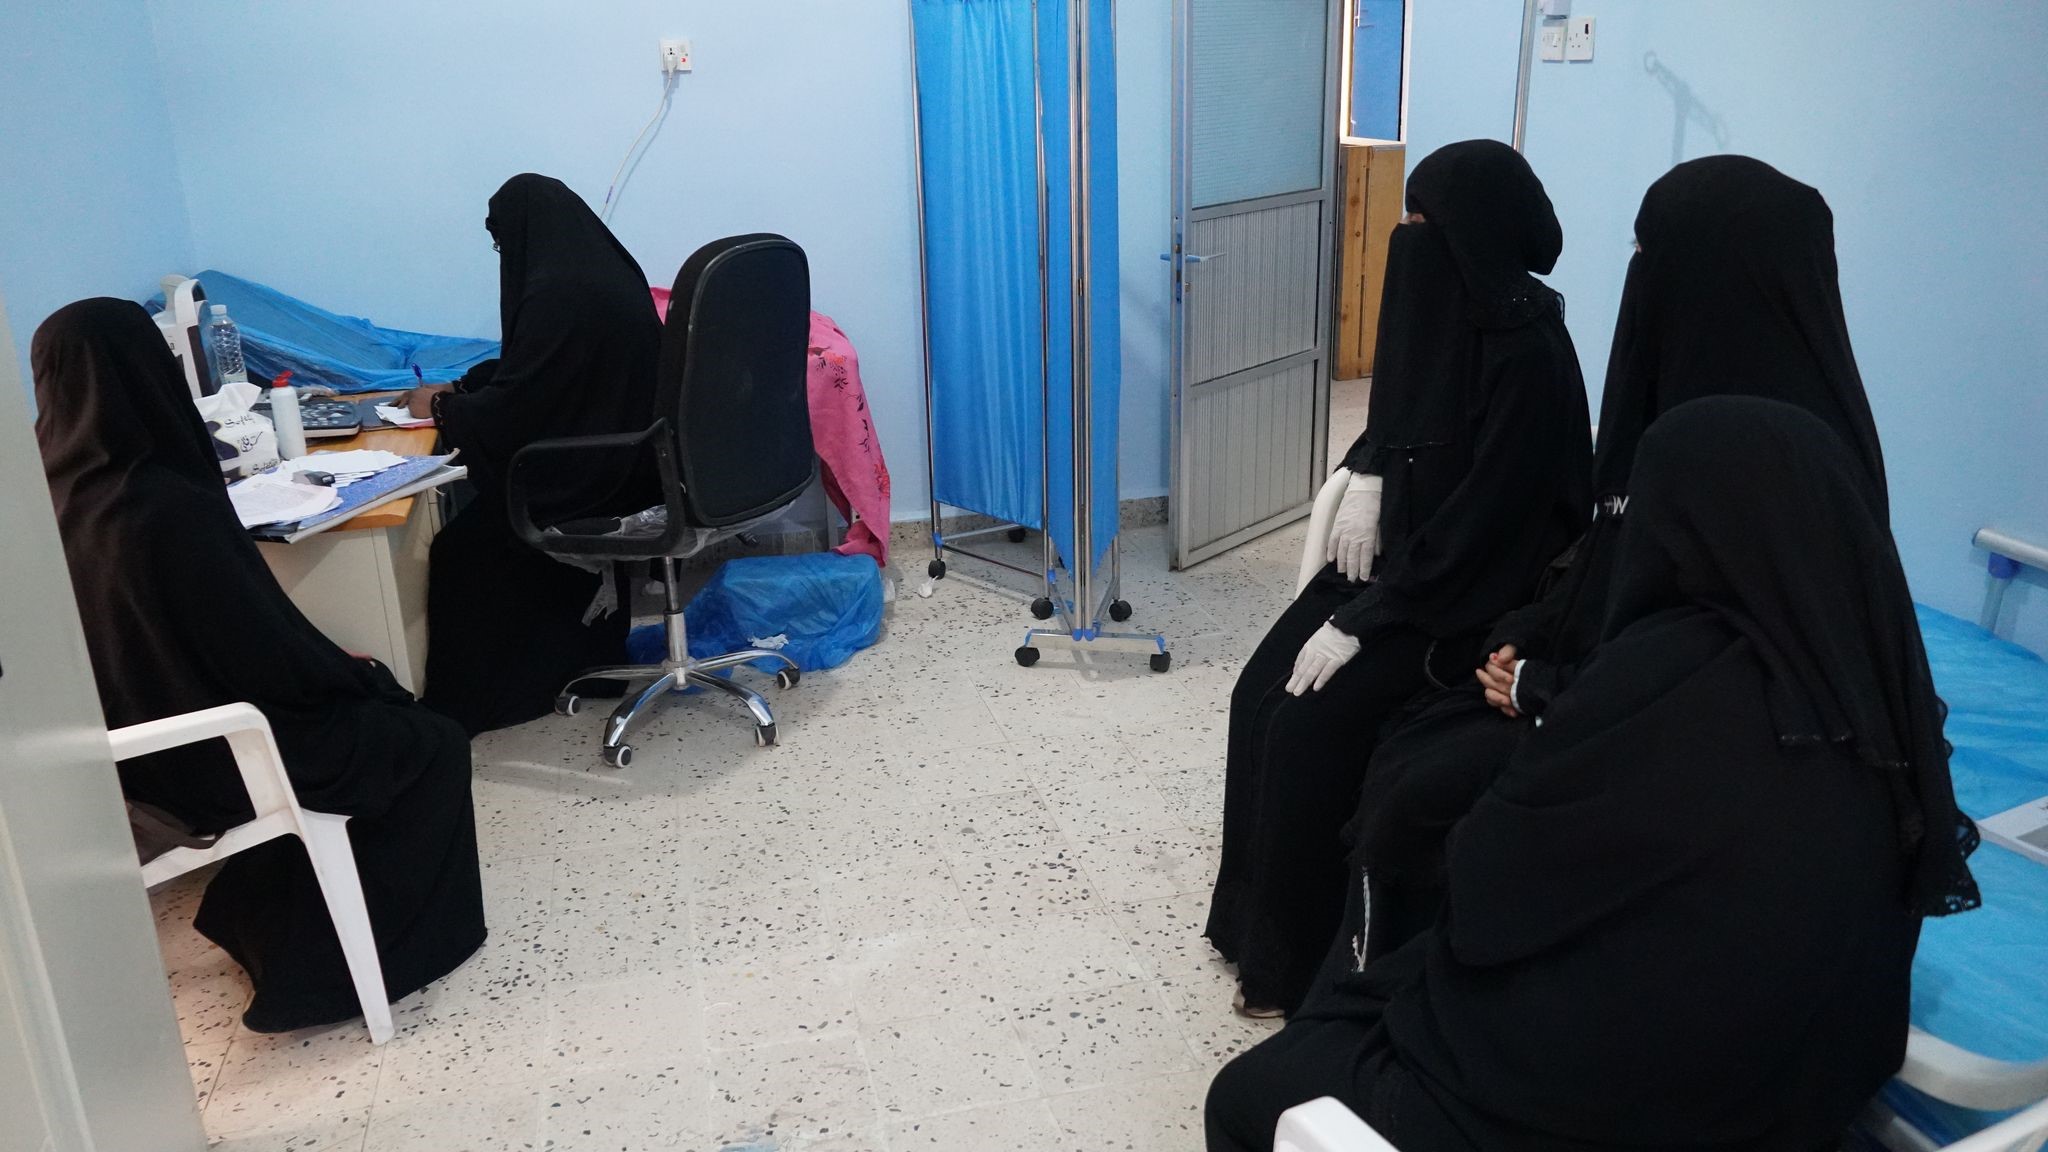 Women wearing black outfits sitting and waiting in a hospital room